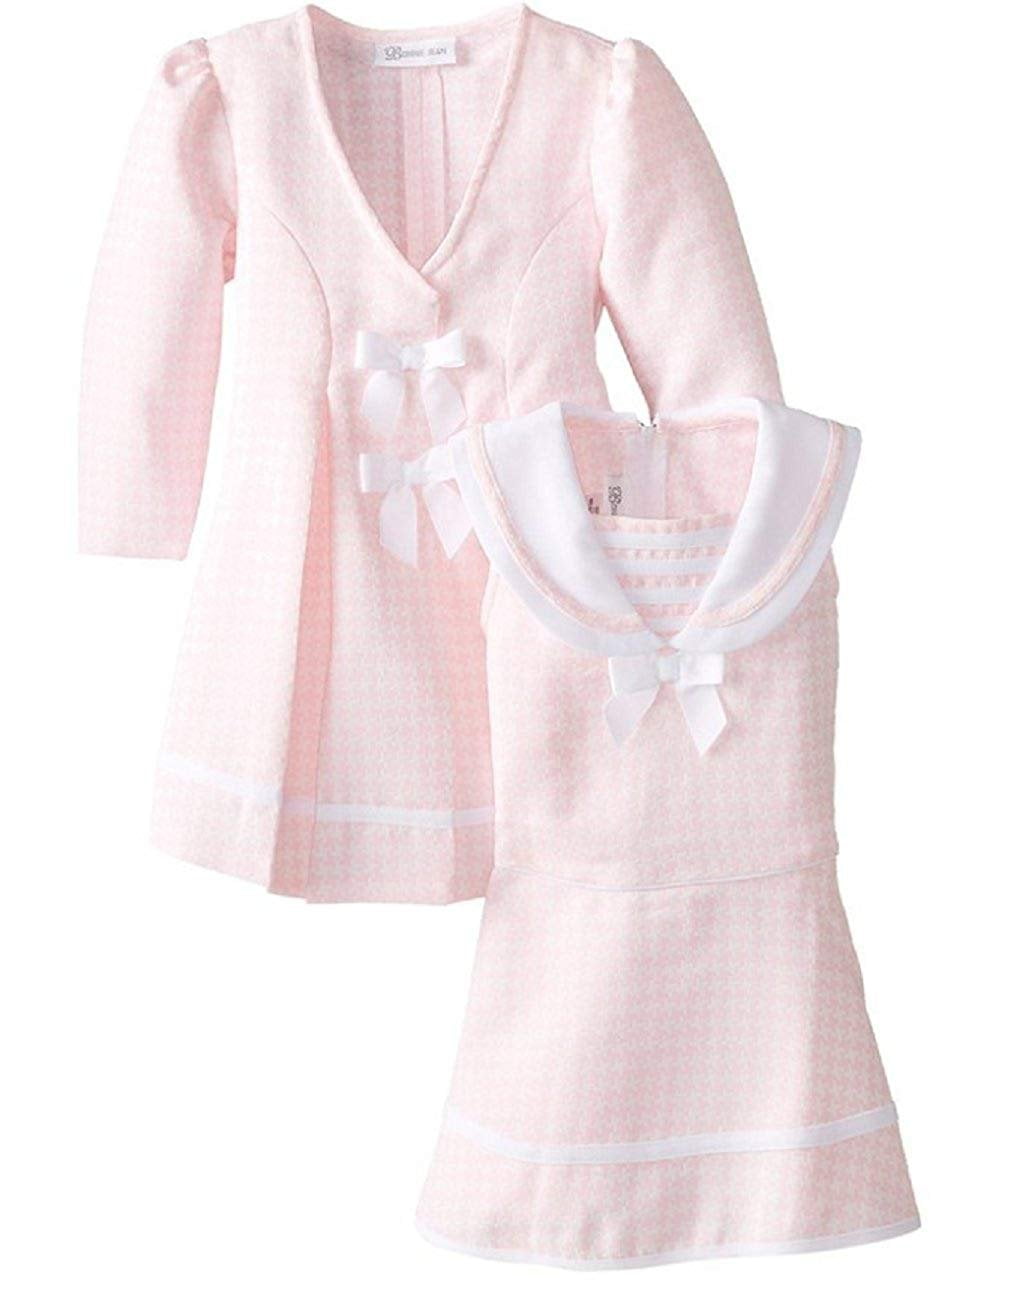 Bonnie Jean Girls Pink White Easter Spring Pageant Dress & Coat 2T 3T 4T New 